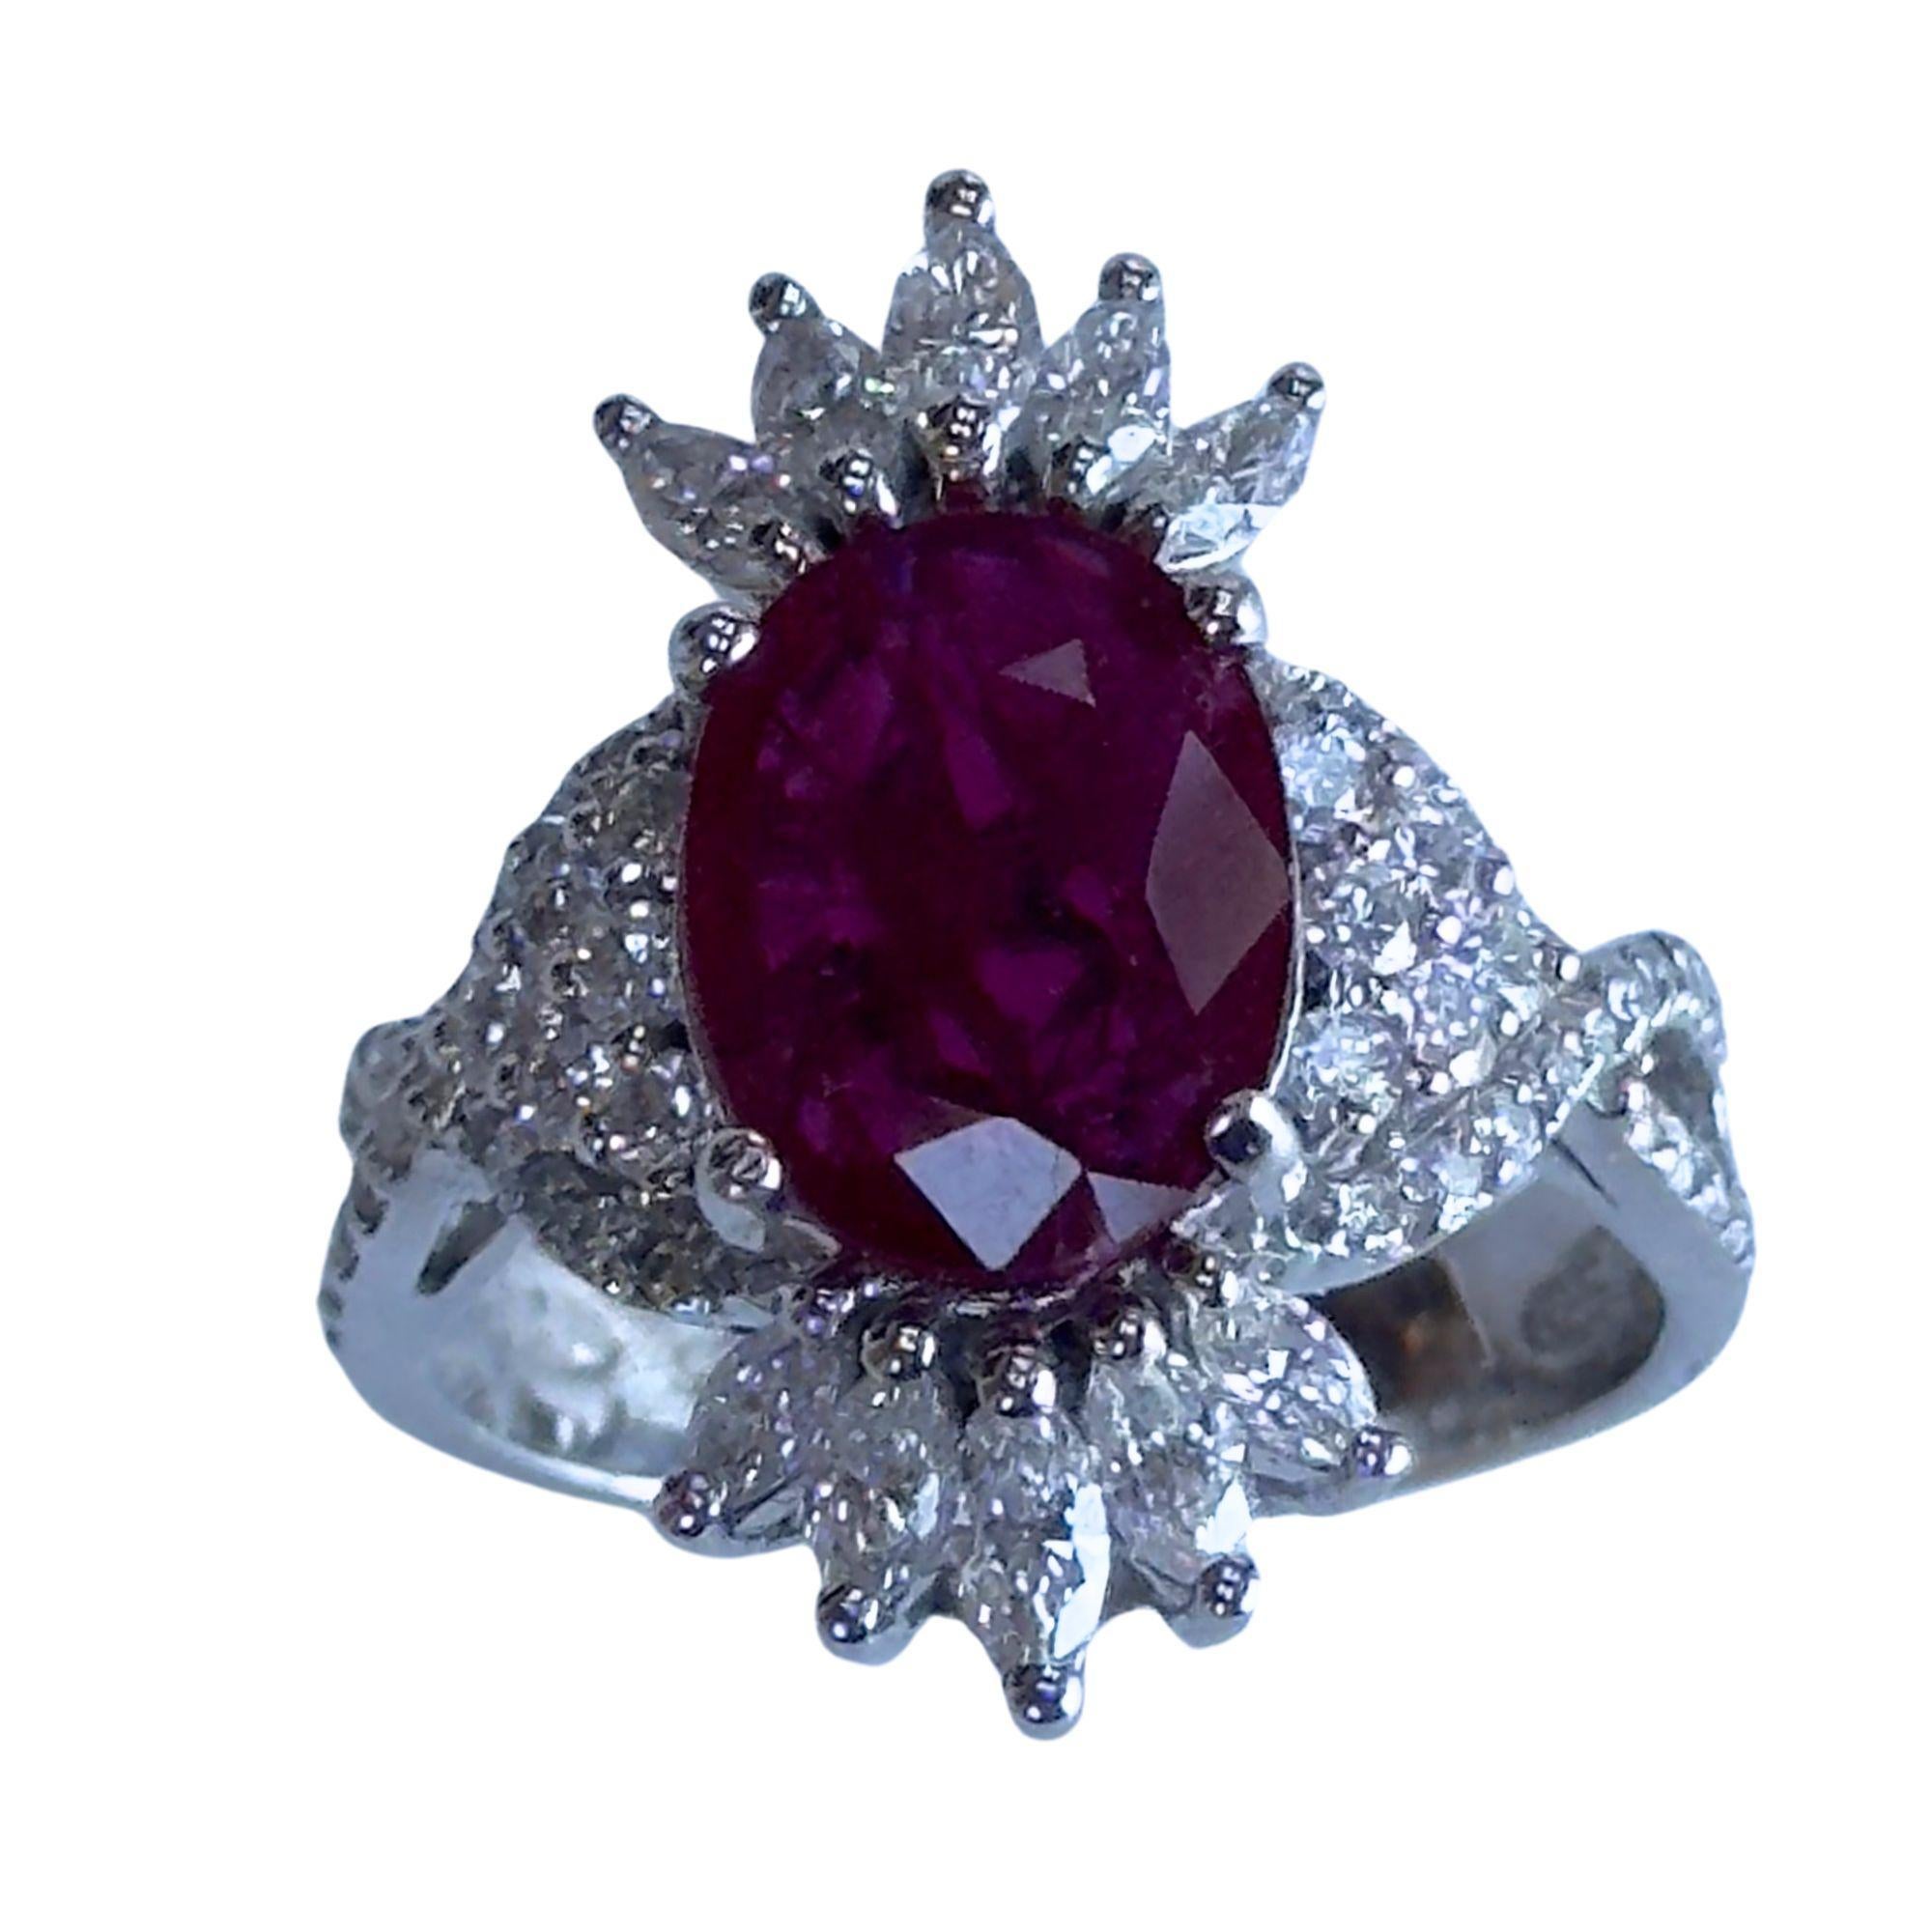 Crafted in elegant 18k white gold, this stunning ring features sparkling 1.26 carat diamonds and a vibrant 2.49 carat ruby center. The ring is marked with 